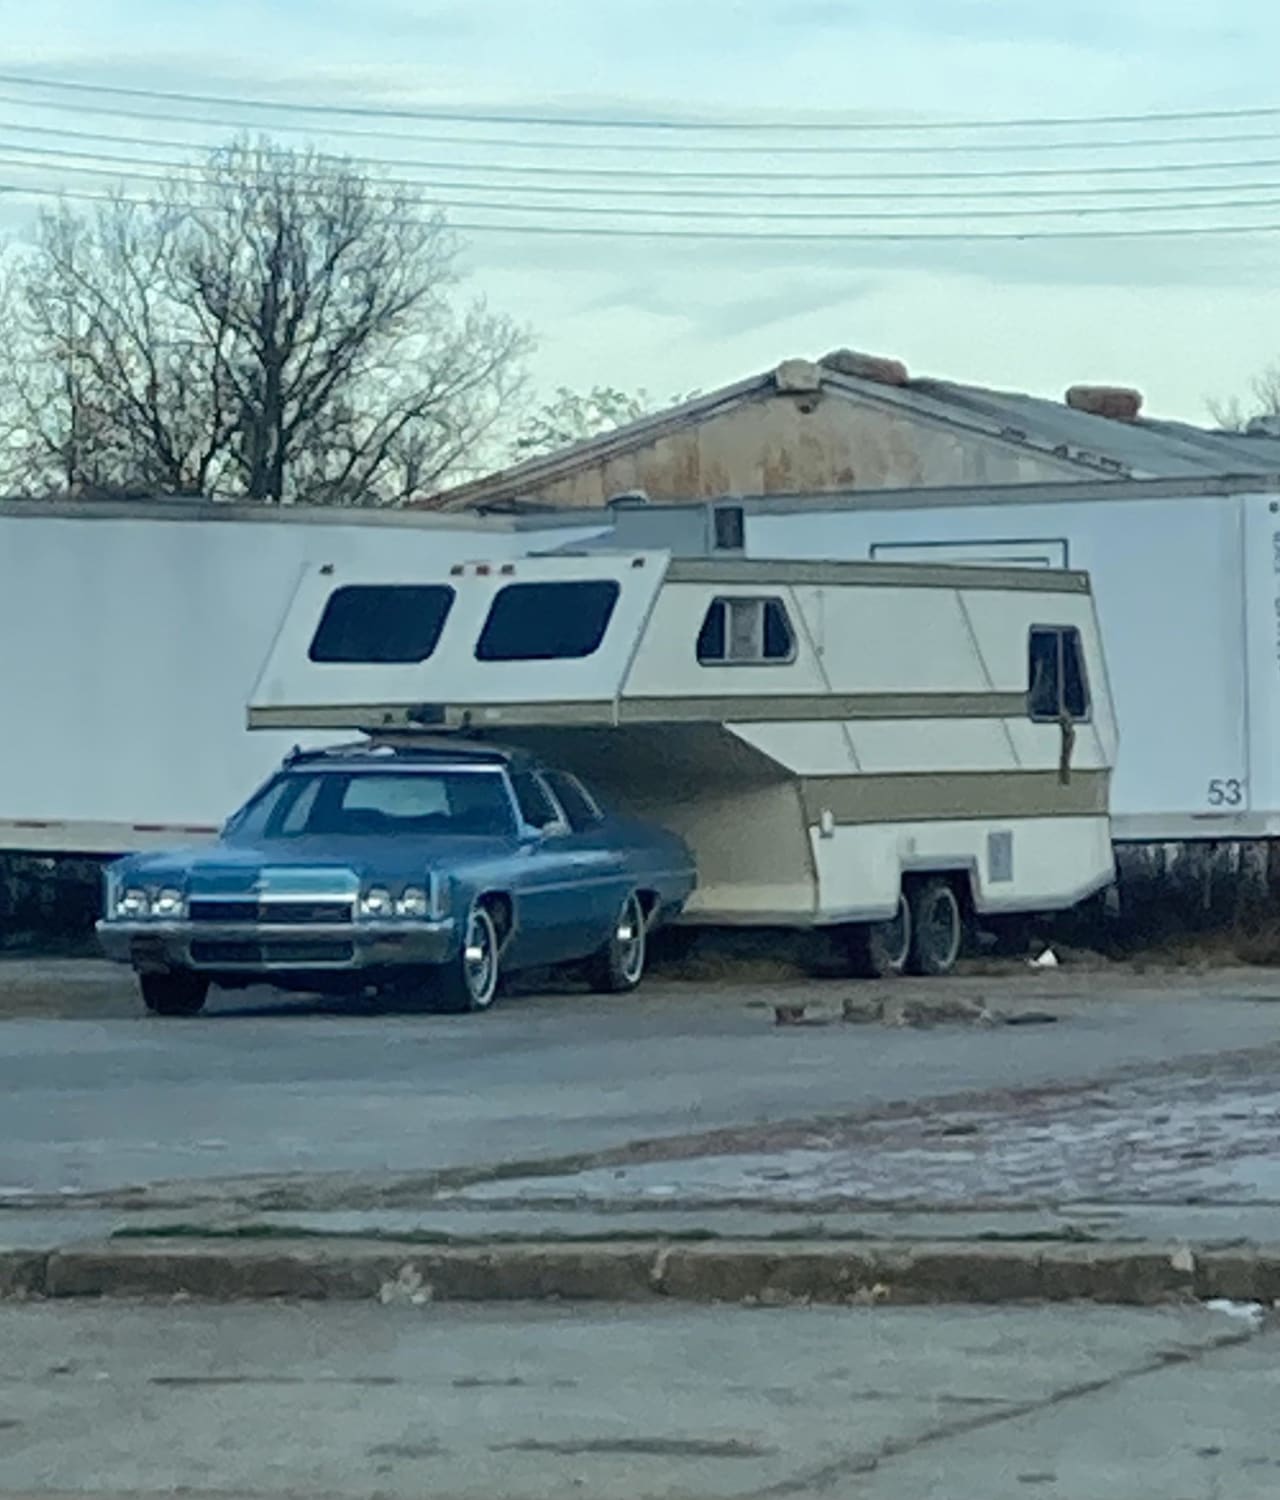 This 70-73 Chevrolet with a 5th wheel on the roof. Spotted today in Memphis TN.